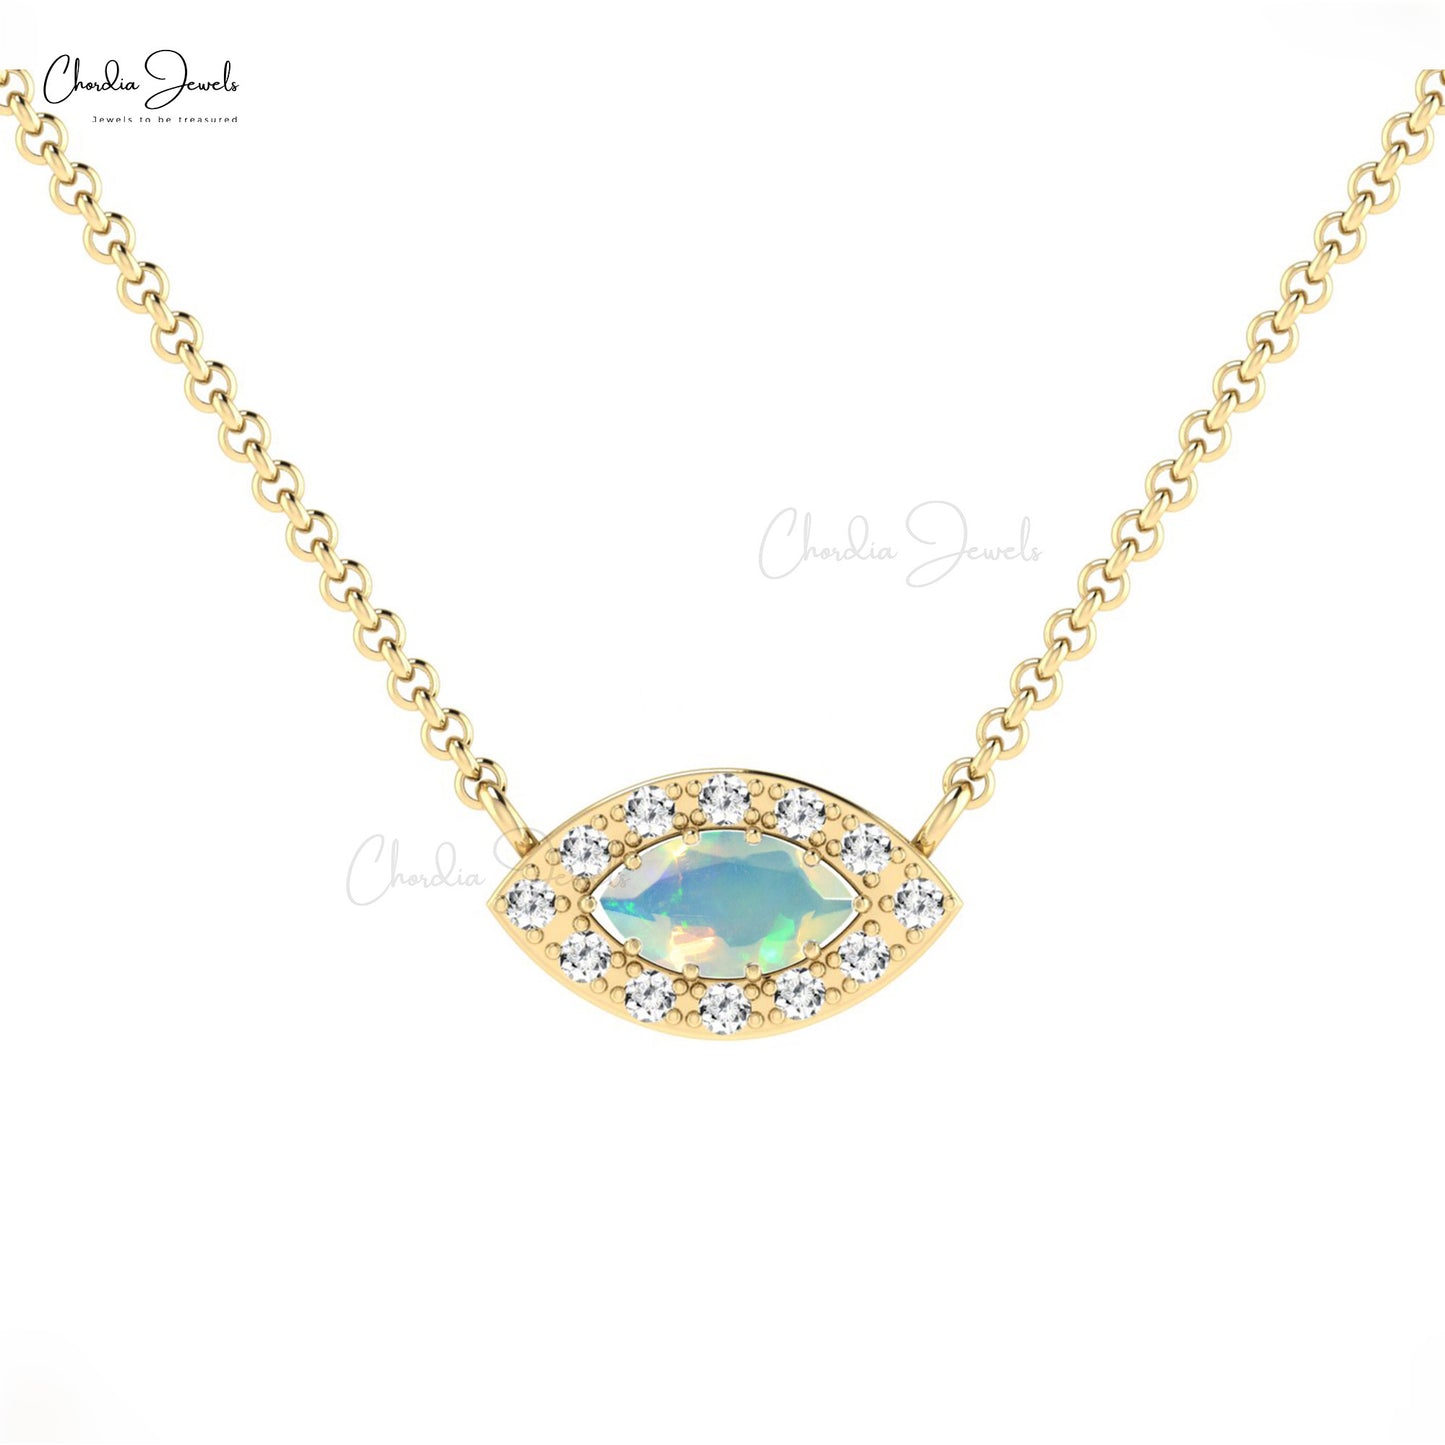 Load image into Gallery viewer, Customized Original AAA Quality Natural Fire Opal and White Diamond Halo Necklace Pendant in 14k Solid Gold Light Weight Jewelry For Gift
